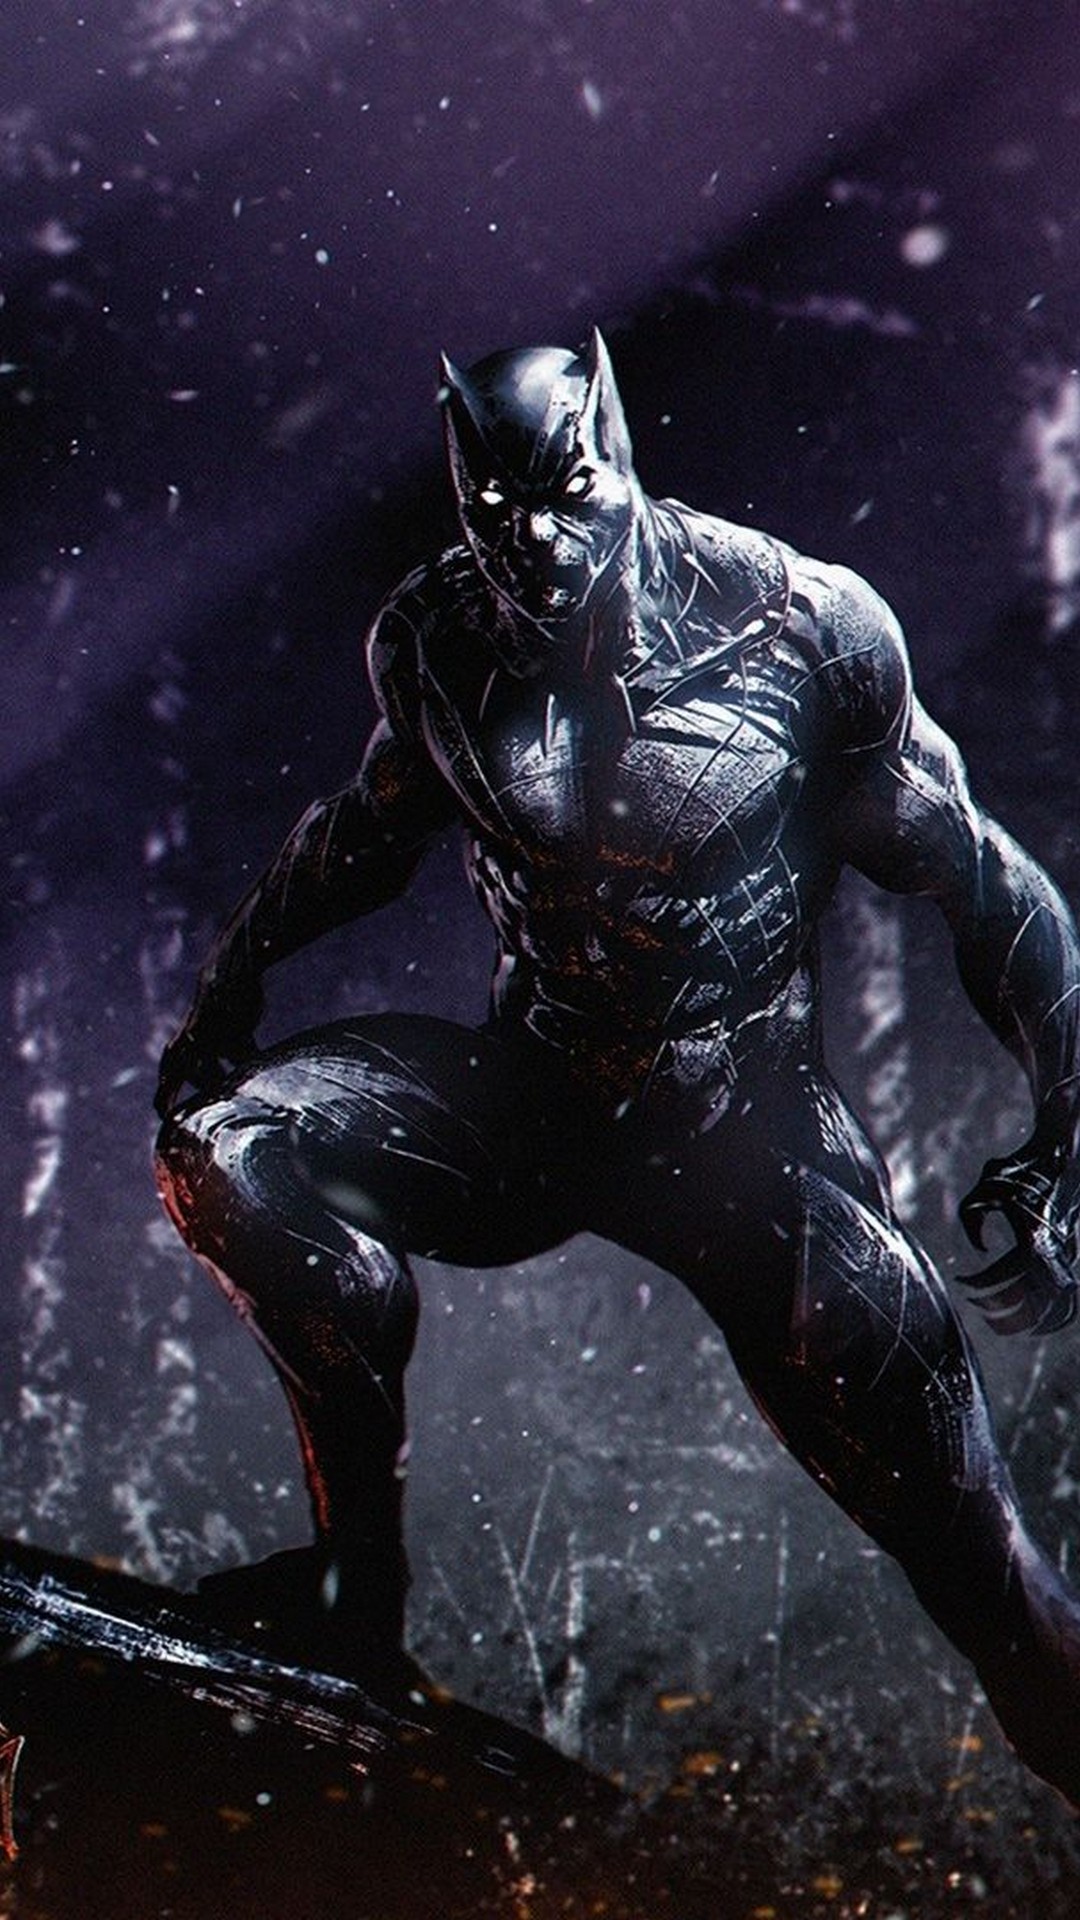 Wallpaper Black Panther for iPhone With high-resolution 1080X1920 pixel. You can use this wallpaper for your iPhone 5, 6, 7, 8, X, XS, XR backgrounds, Mobile Screensaver, or iPad Lock Screen